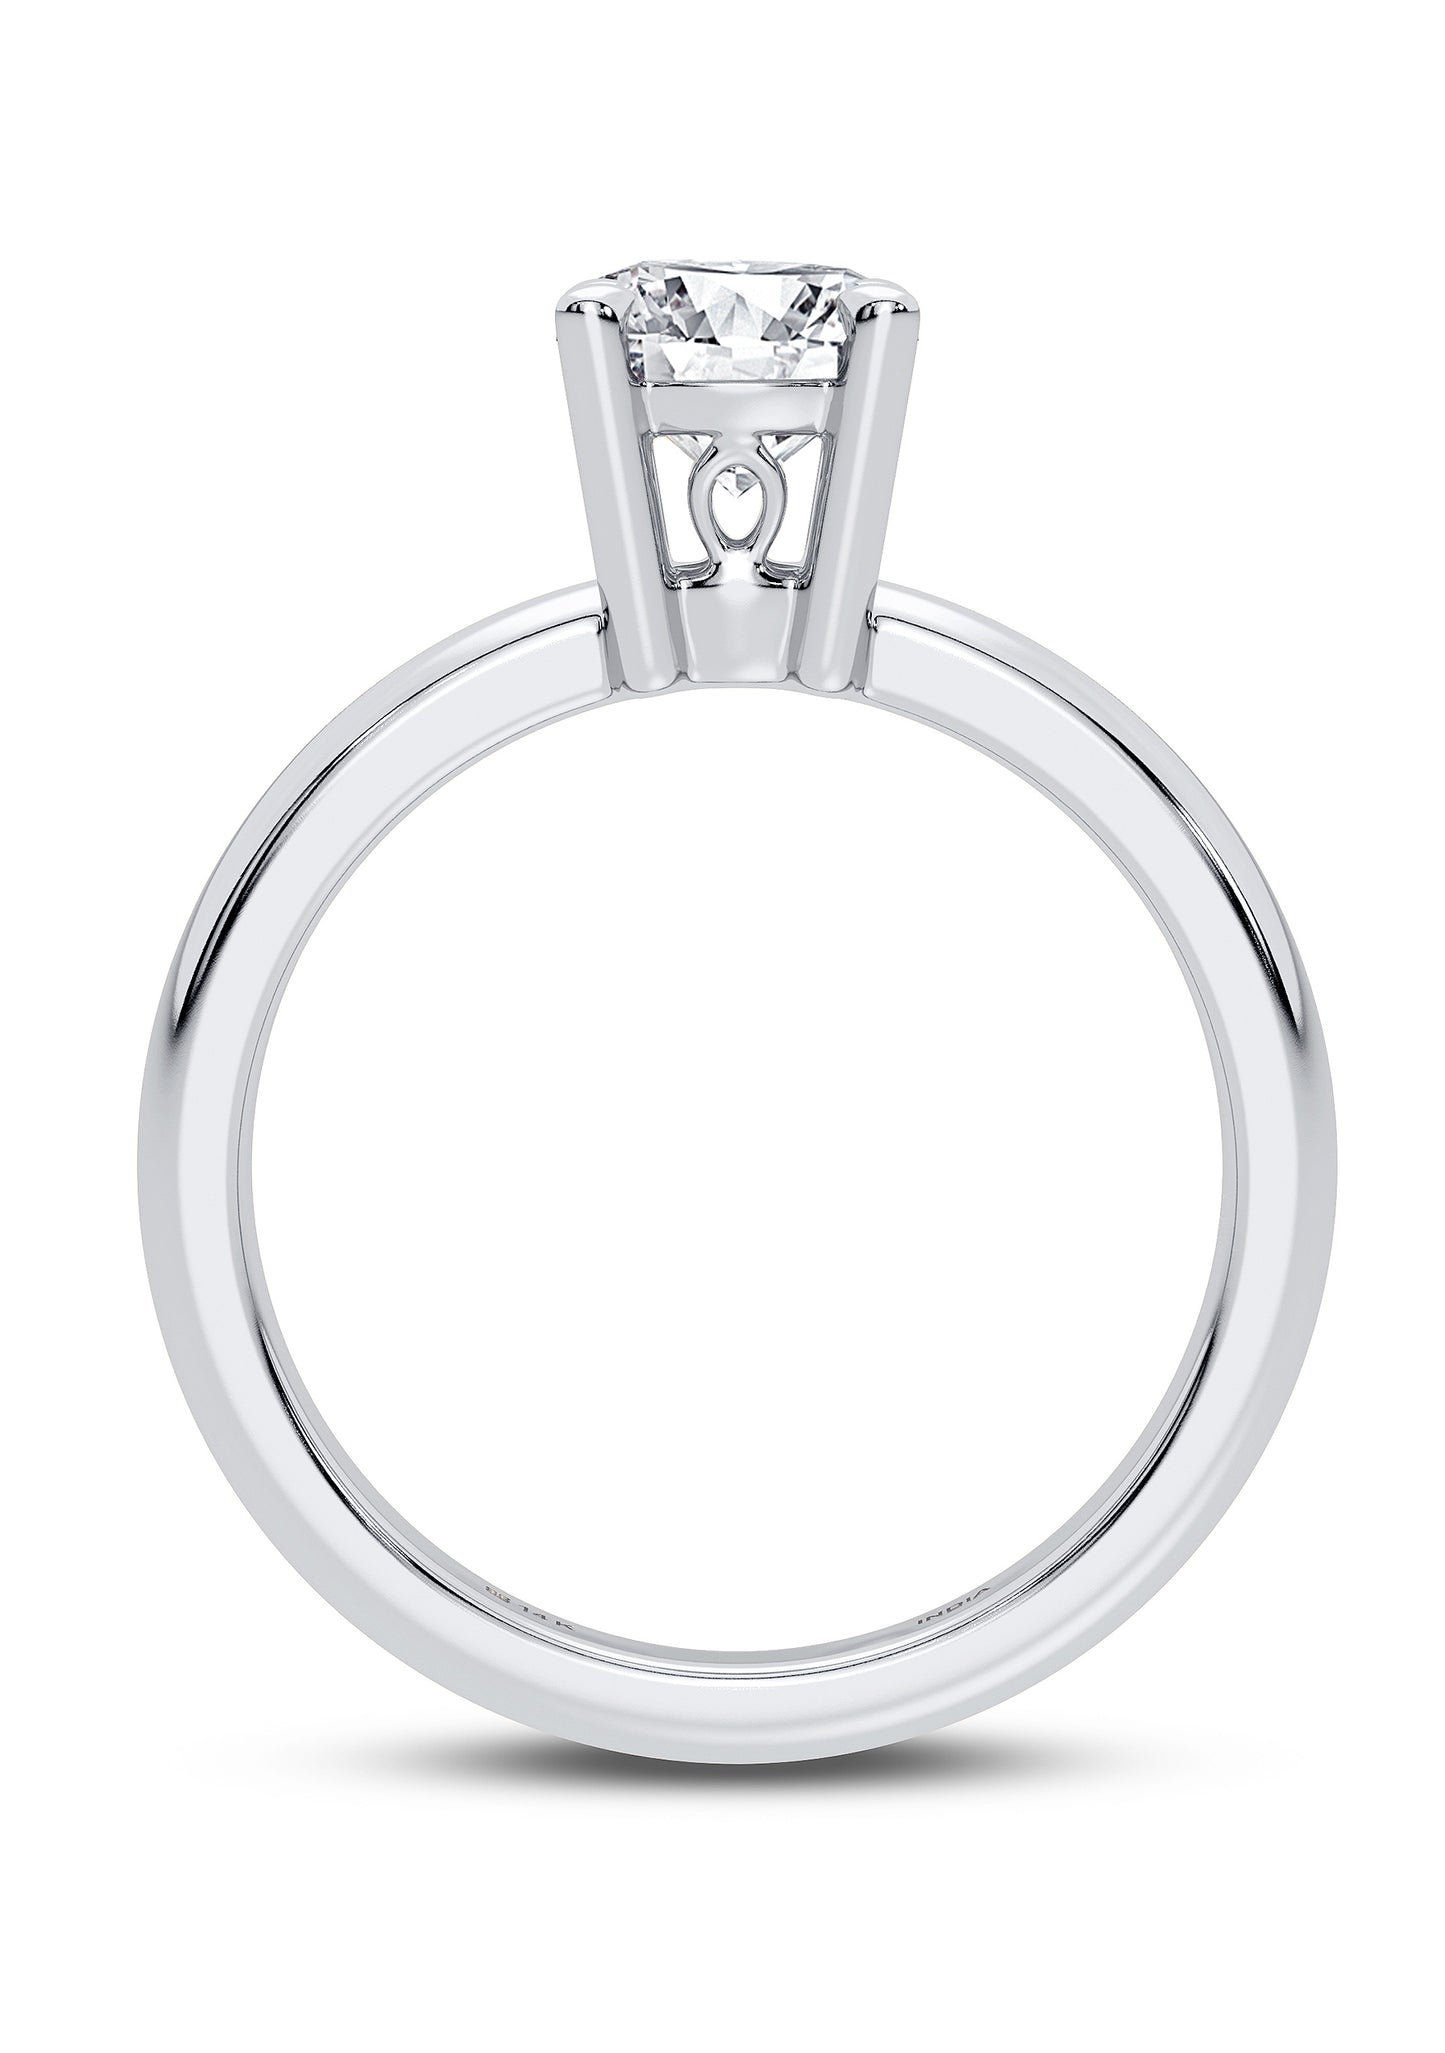 14K White Gold 1.00 ct Lab Grown diamond solitaire ring